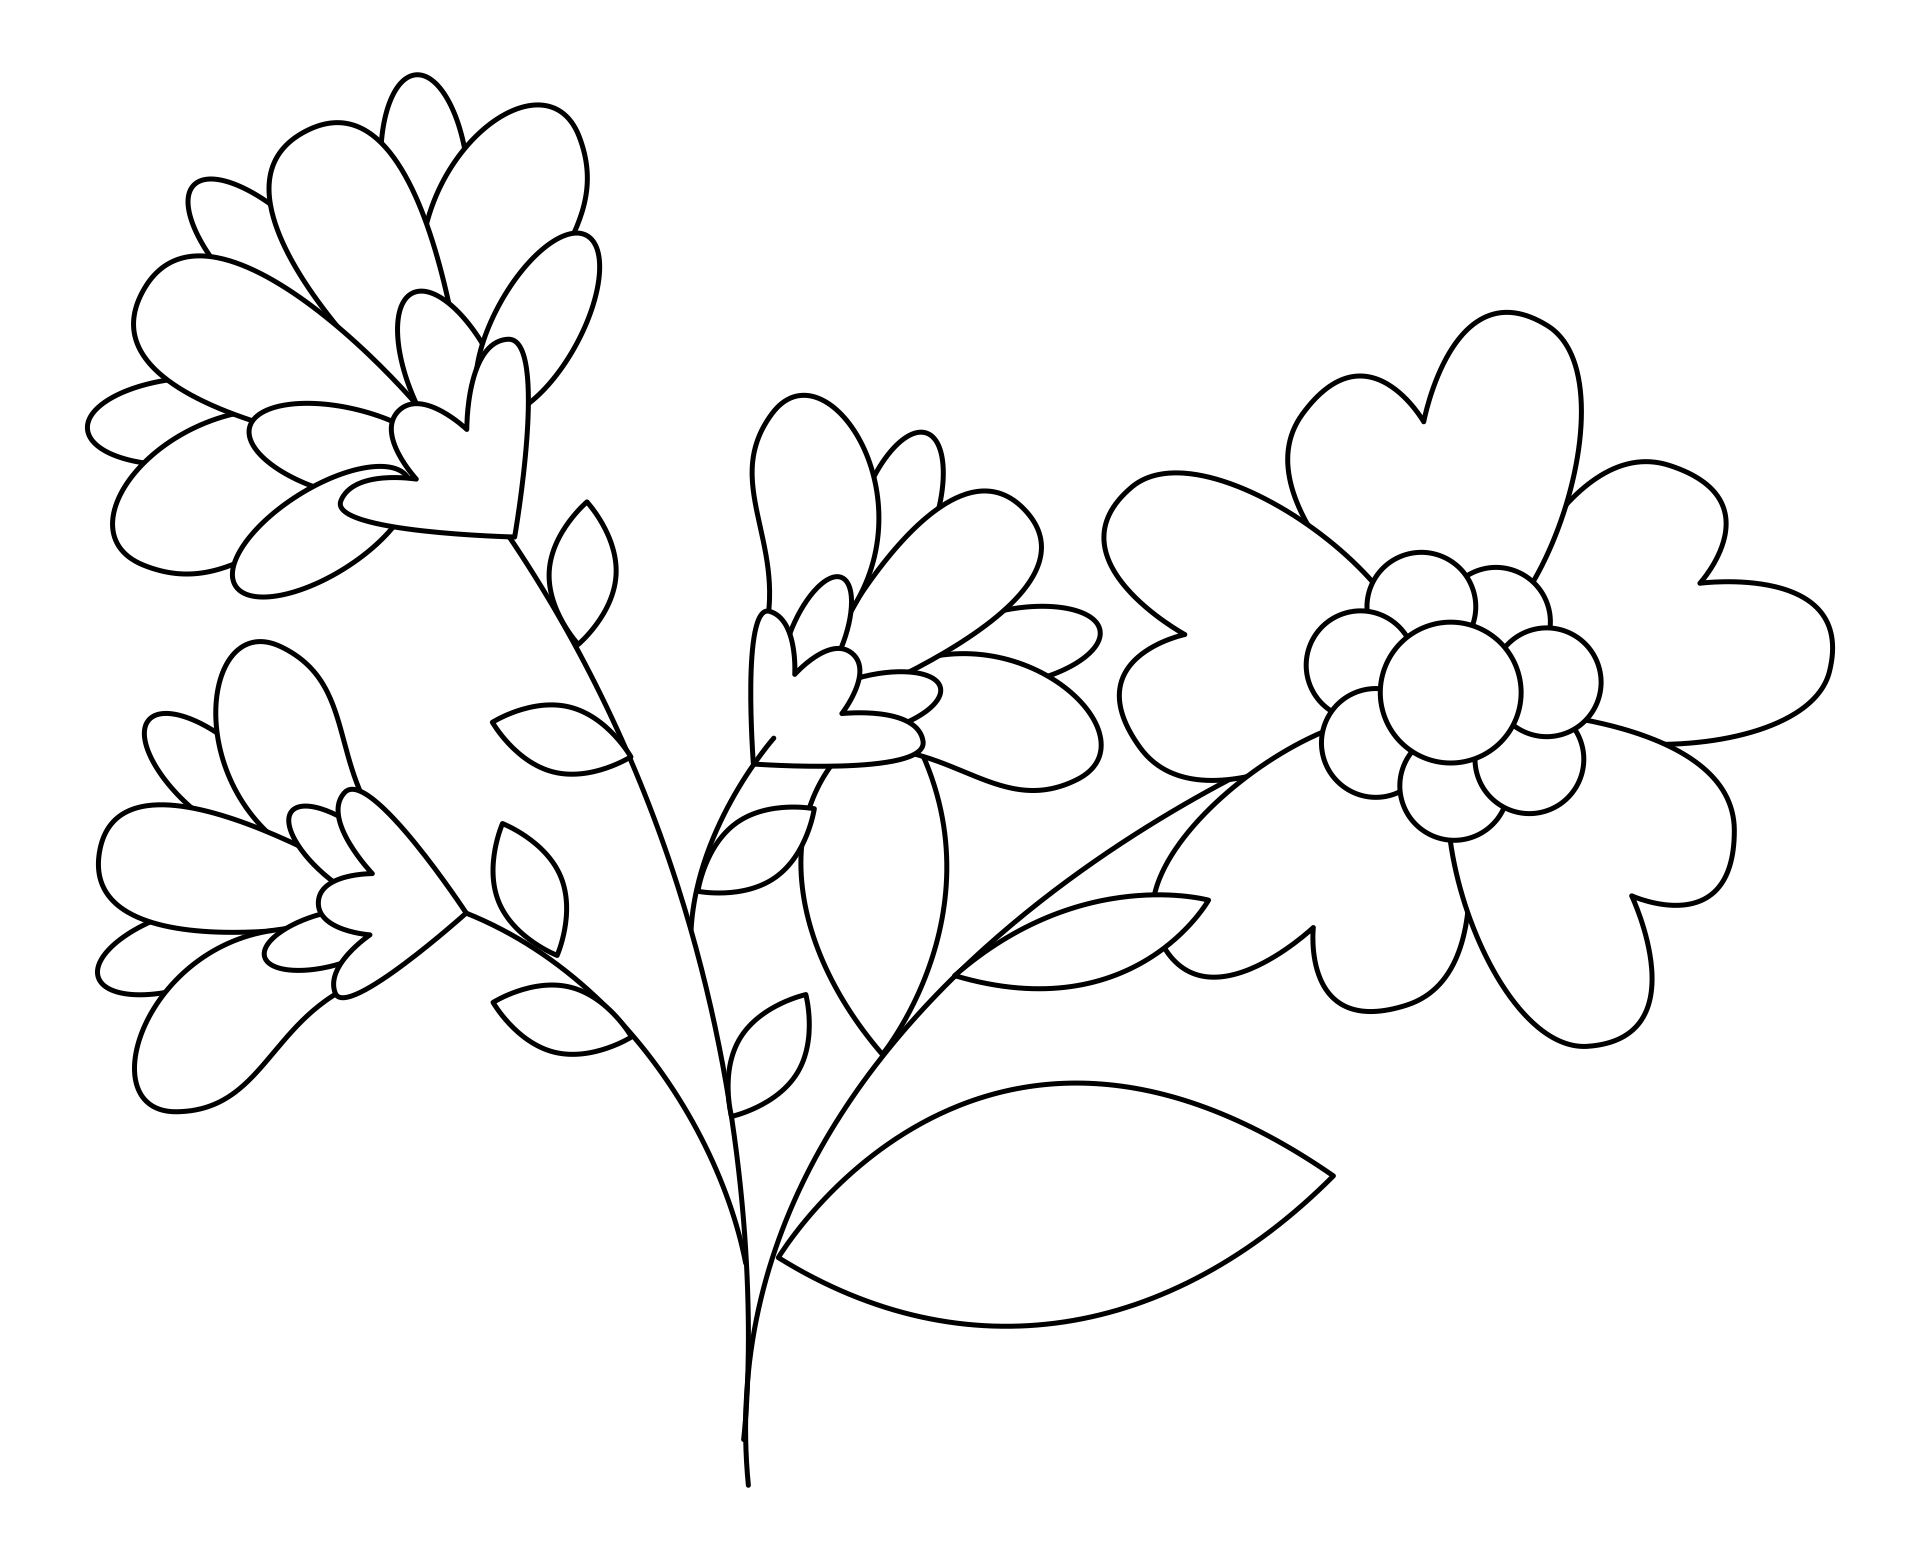 6 Best Images of Free Printable Flower Embroidery Patterns Flower